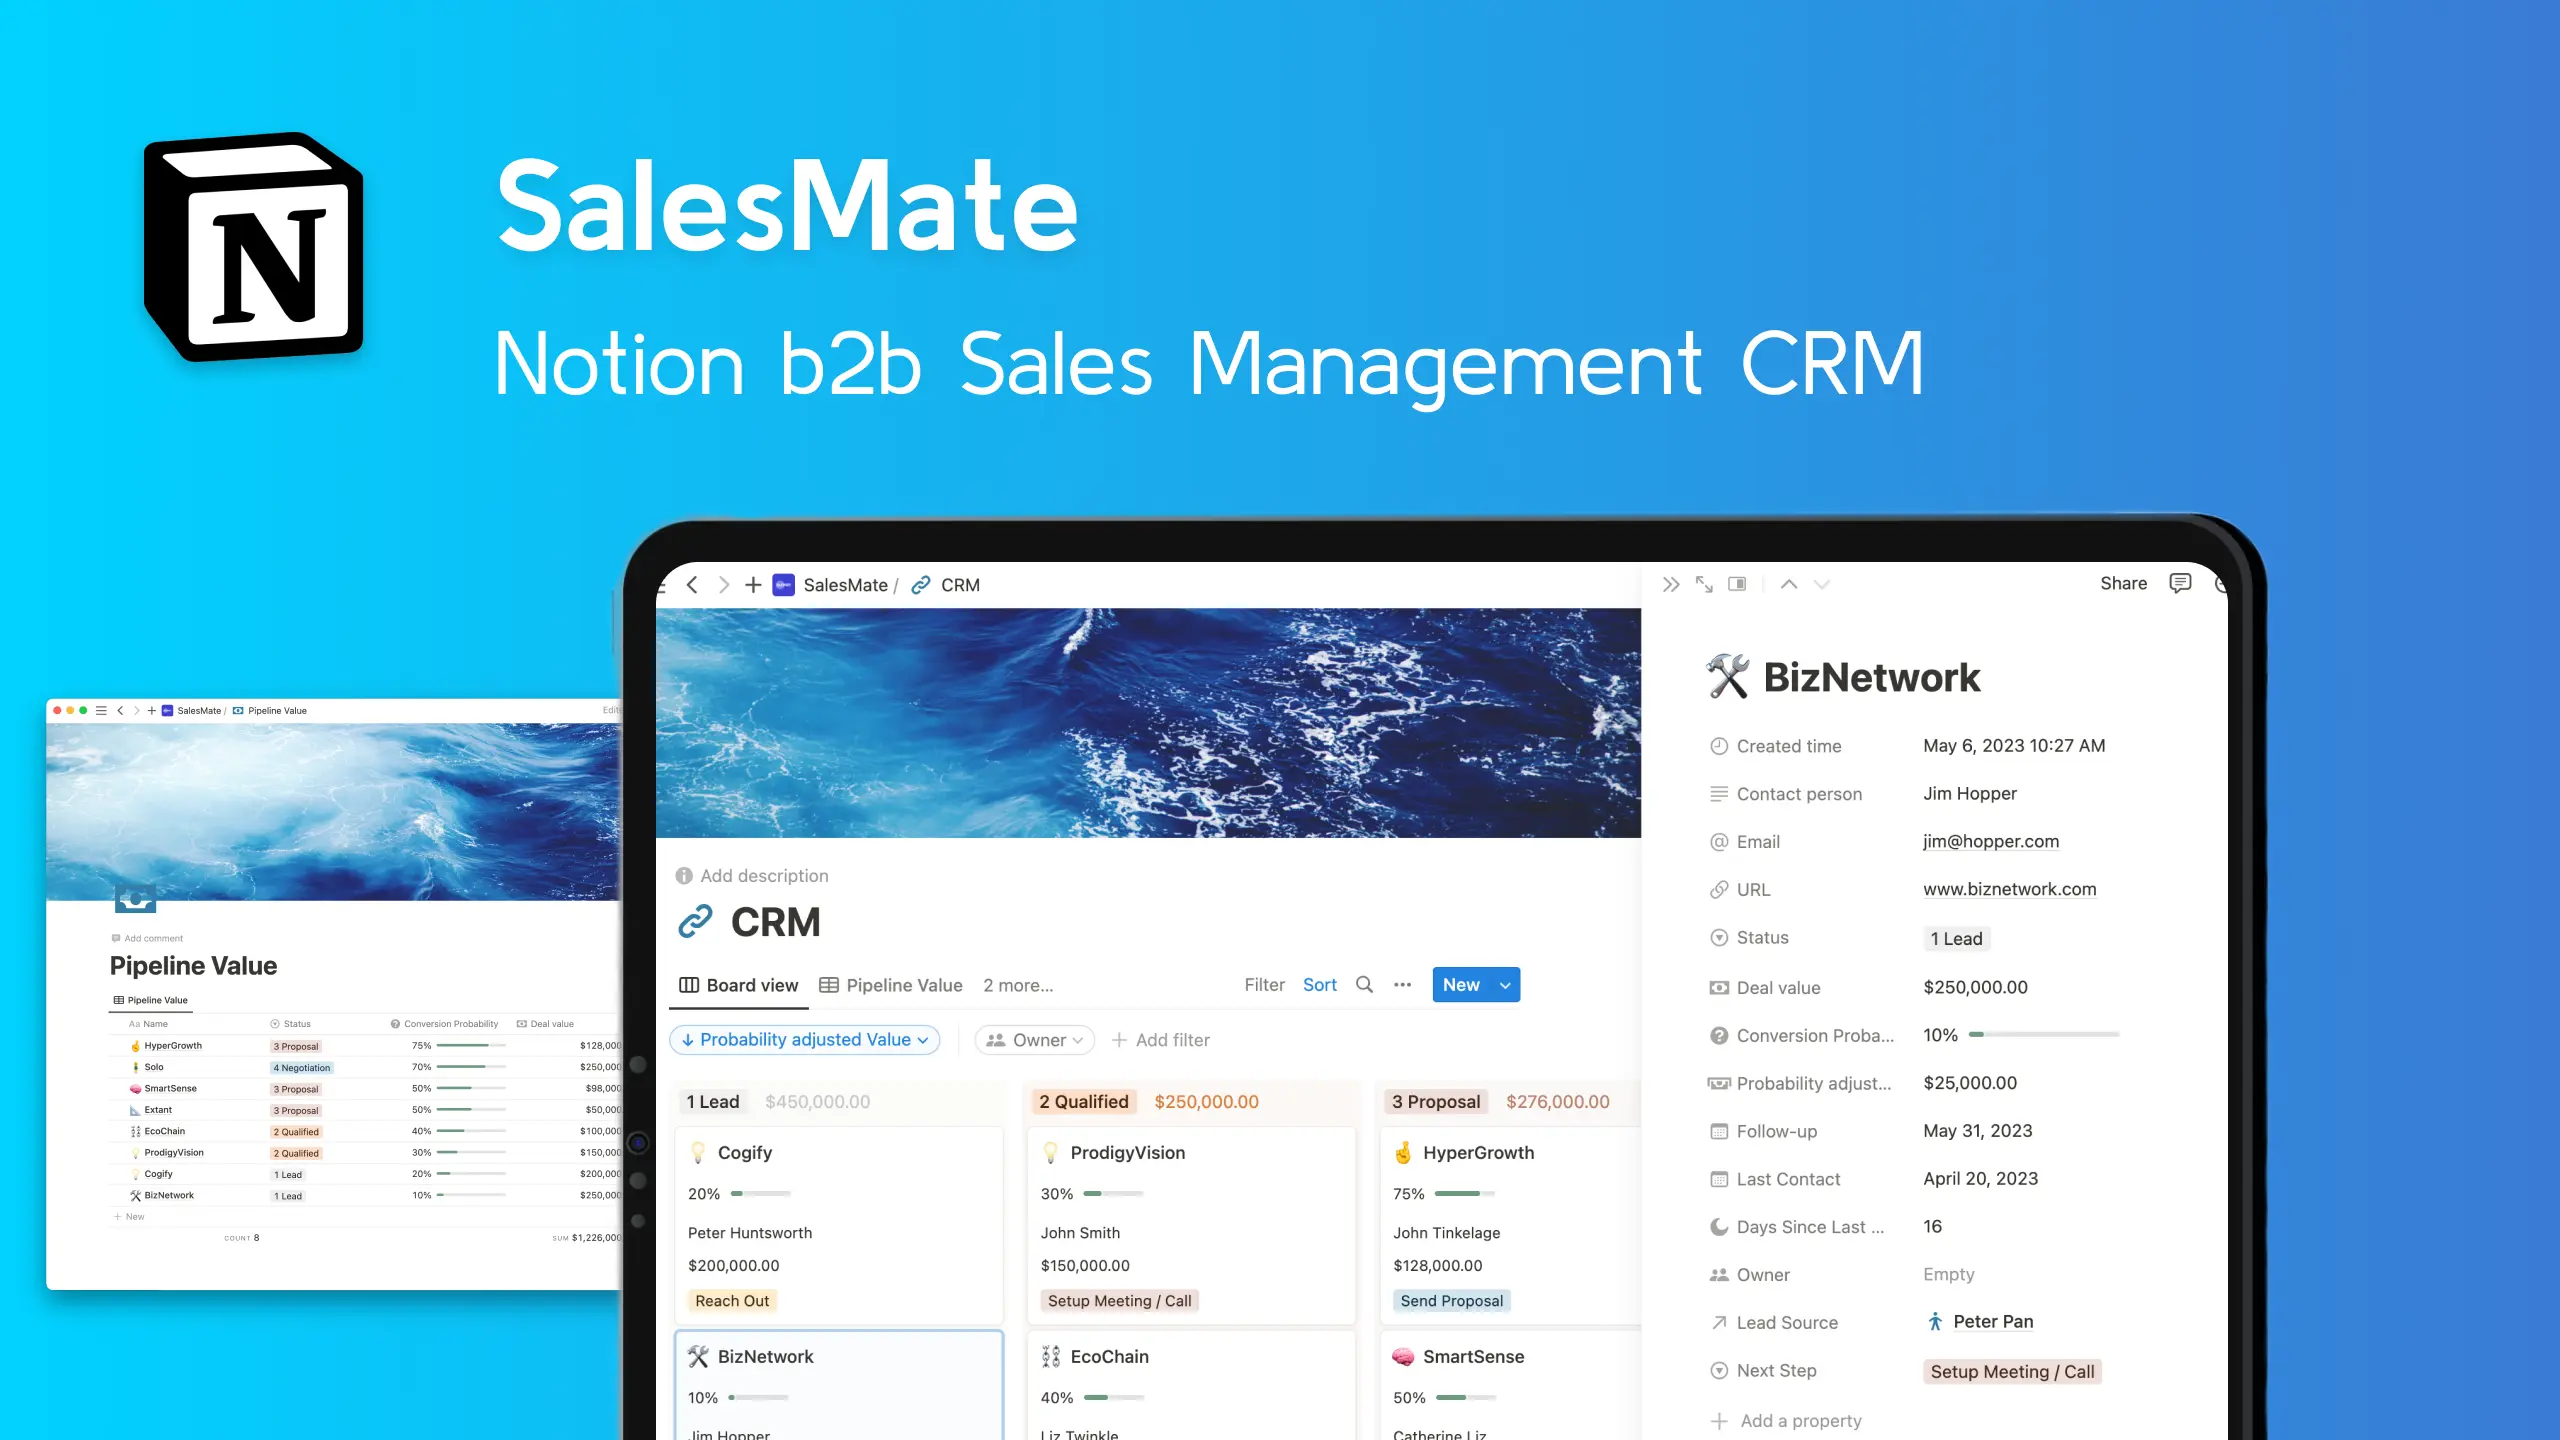 Salesmate - Notion Sales Management Crm For Any Small Business image